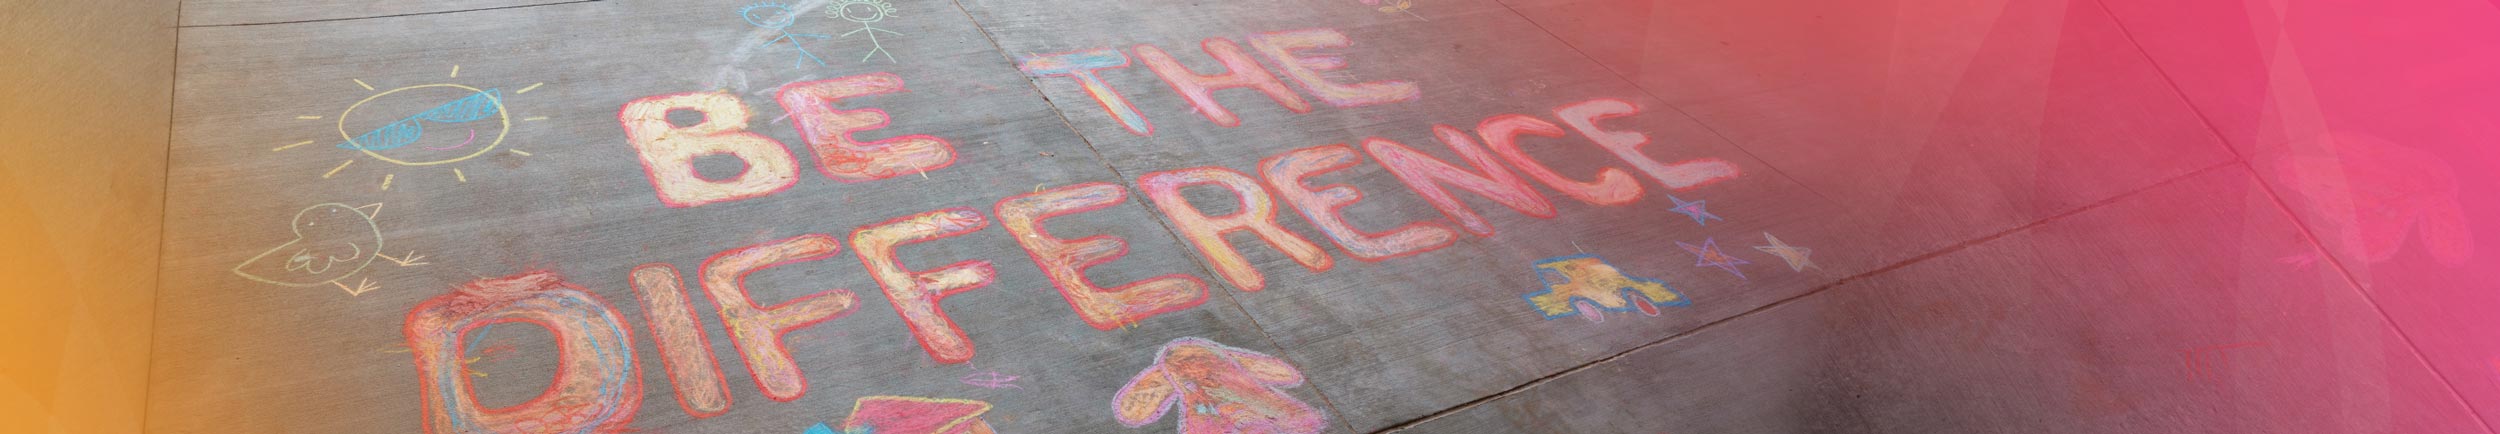 sidewalk chalk art reads 'be the difference'